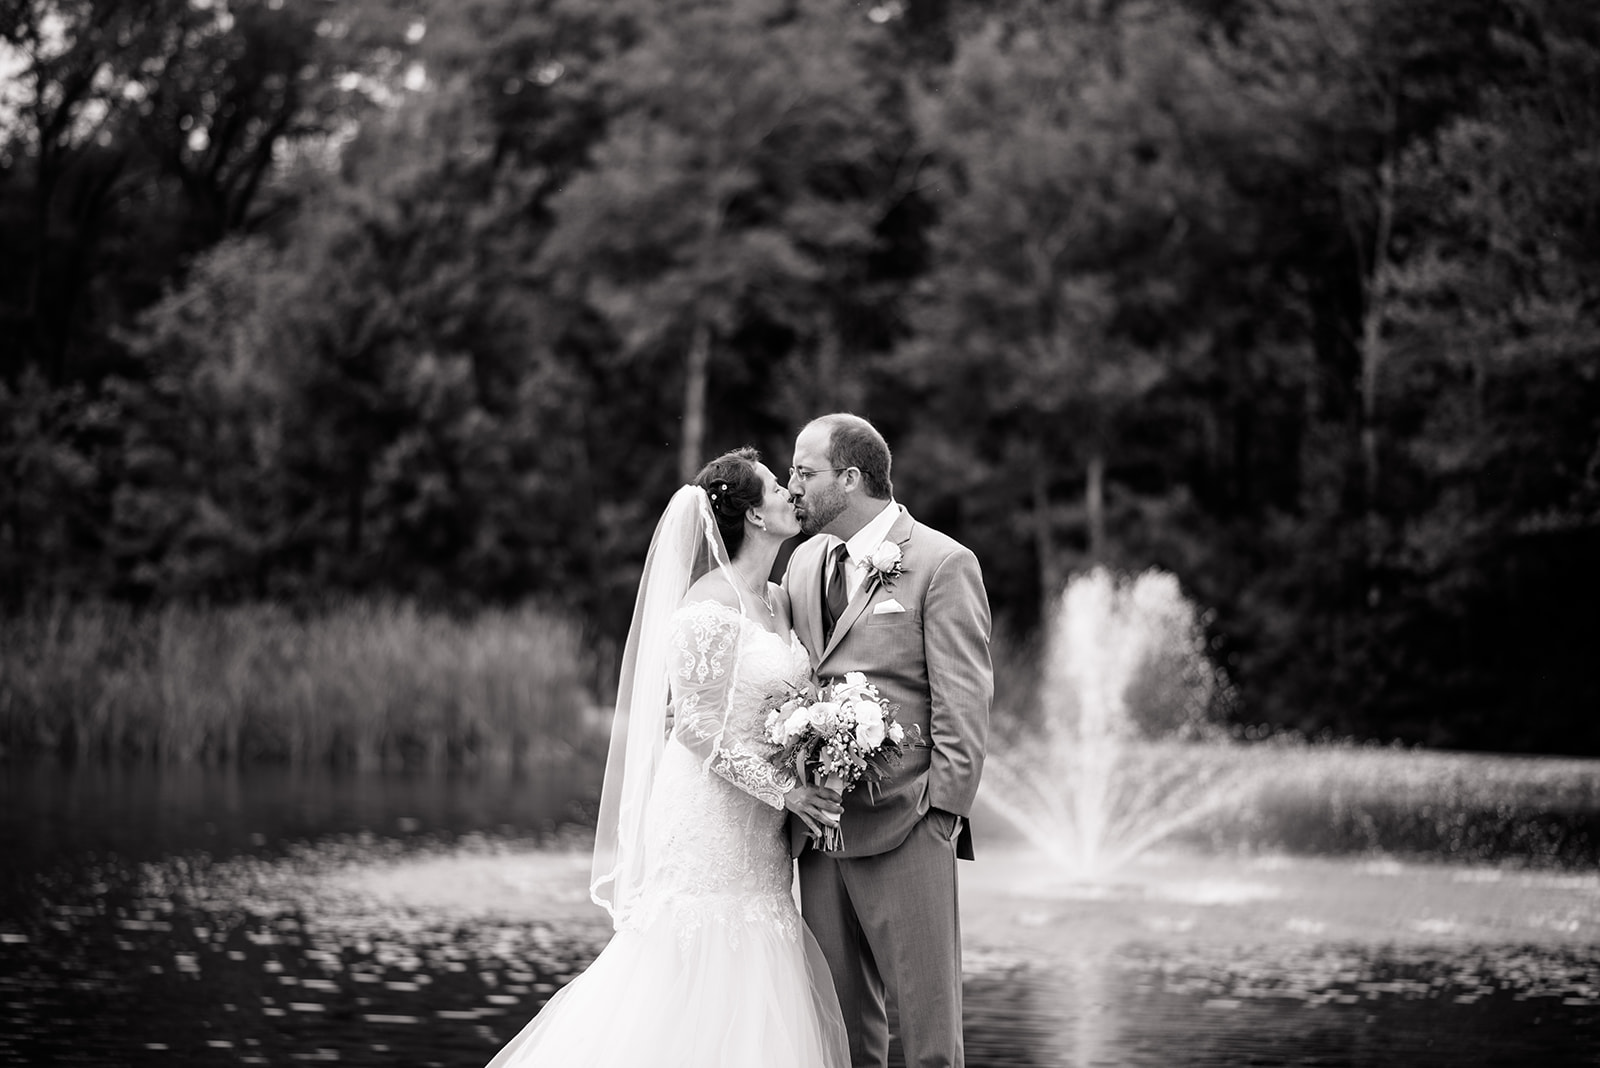 A black and white wedding photo of a bride and groom in front of a pond and fountain.  Black and white wedding photos Outdoor bridals Bride and groom pose #dixonappleorchard #orchardweddingvenue #outdoorwedding #appleorchardwedding #wisconsinweddingvenue